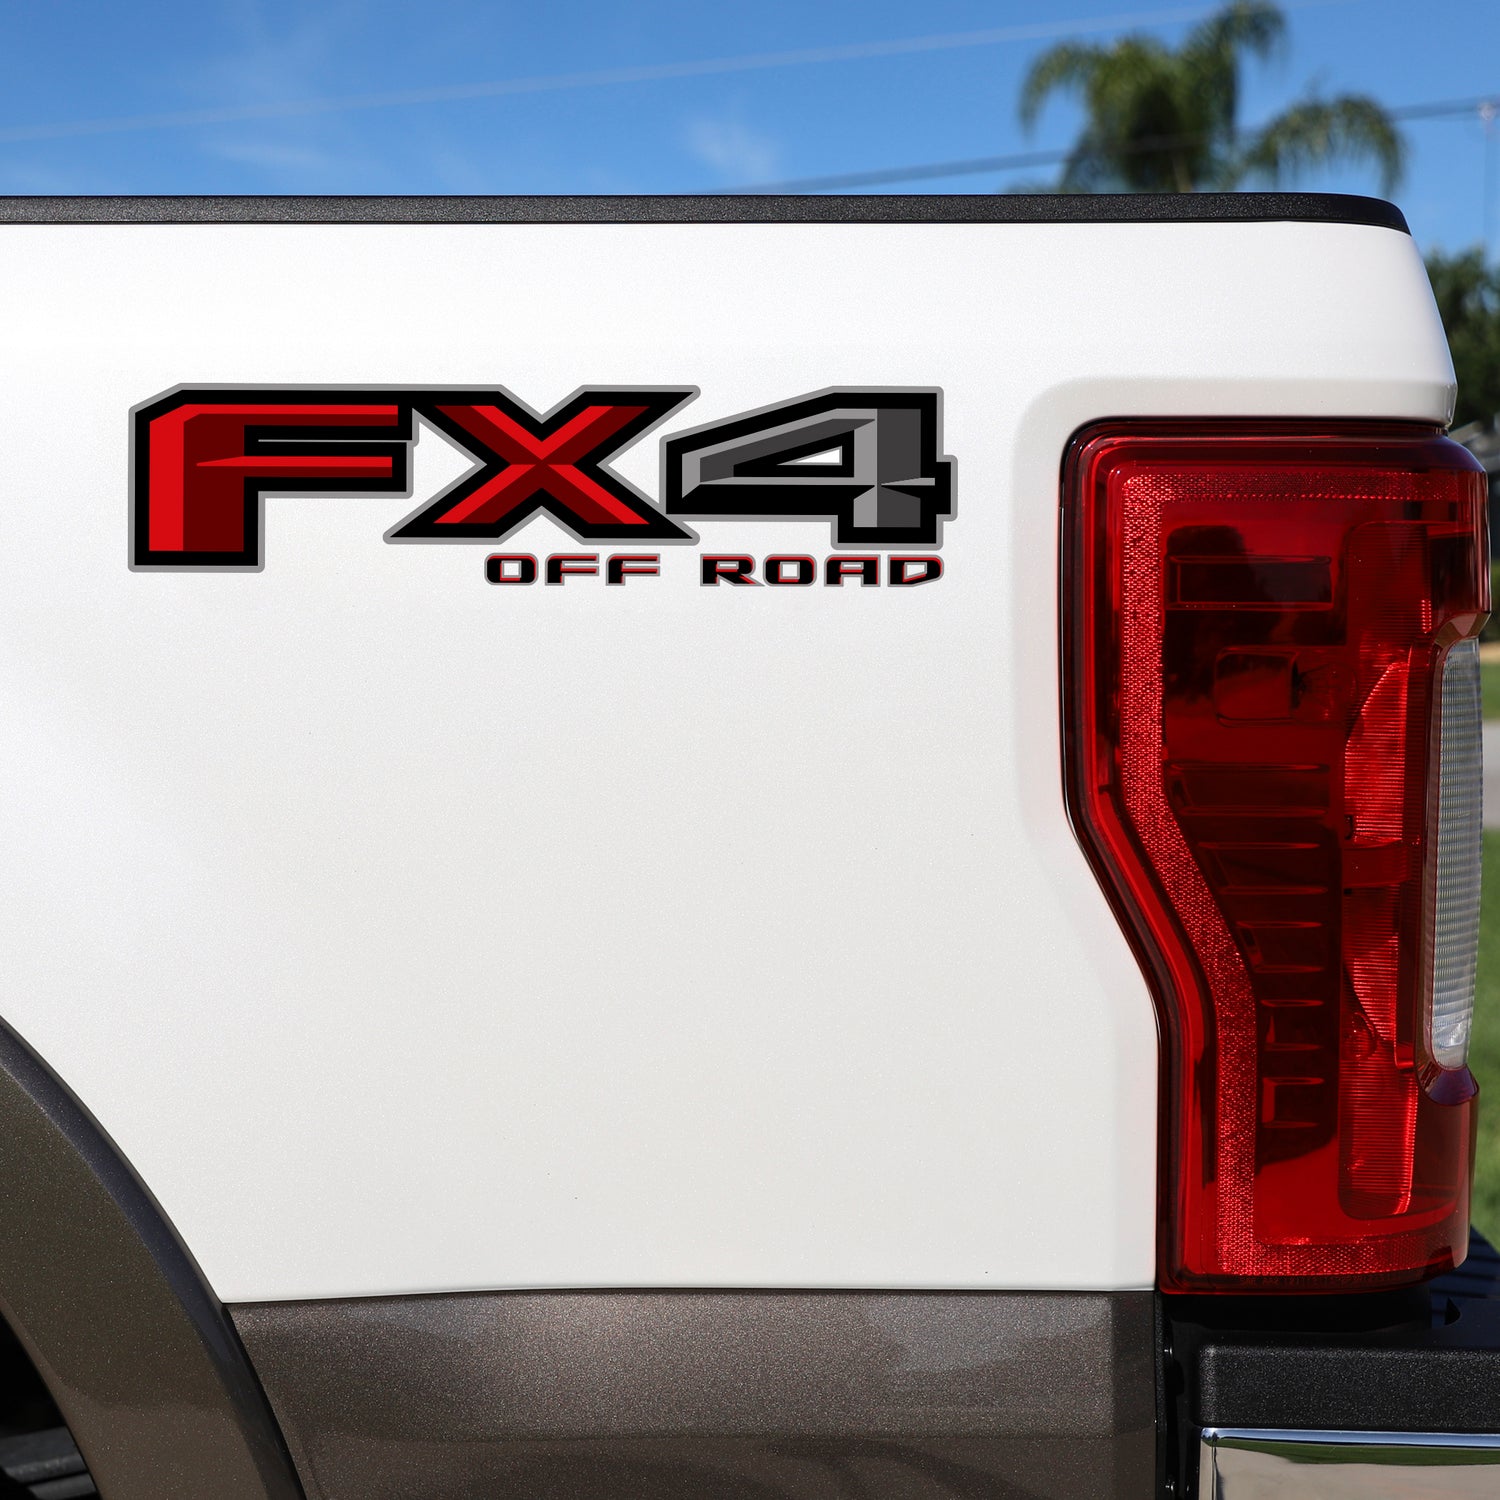 Set of 2: FX4 off-road vinyl decal for 2015-2020 Ford F-150 pickup truck bedside - US Rallystripes